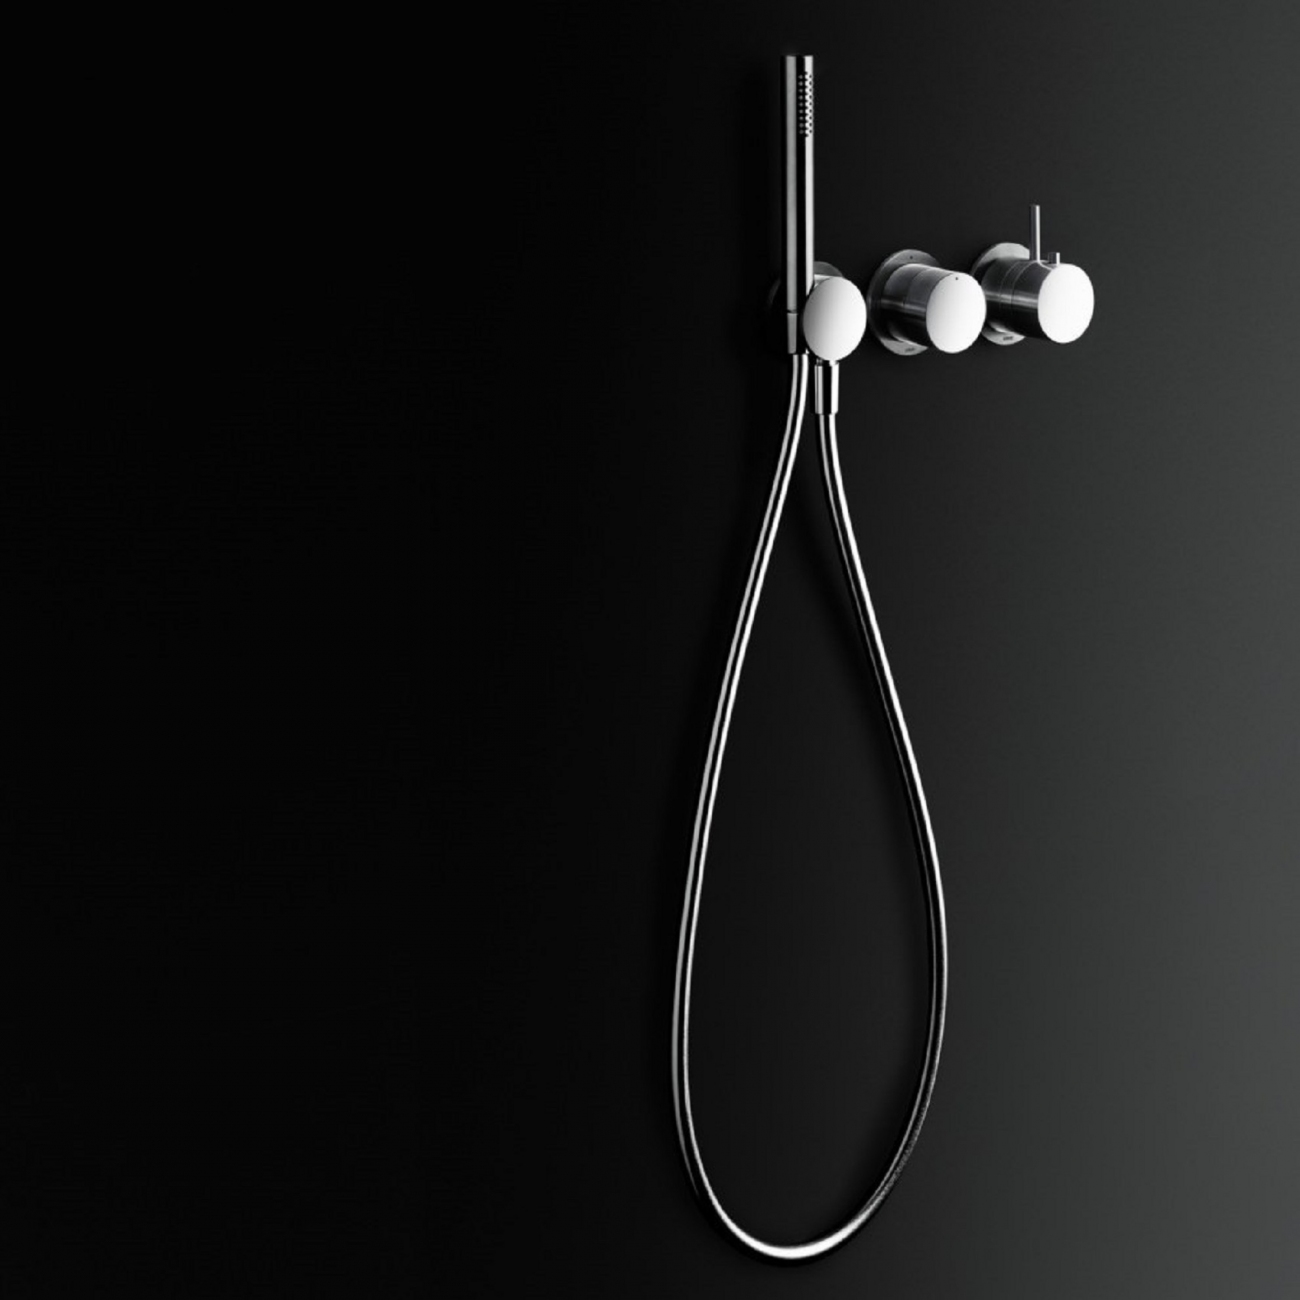 Boffi Eclipse thermostatic shower mixer